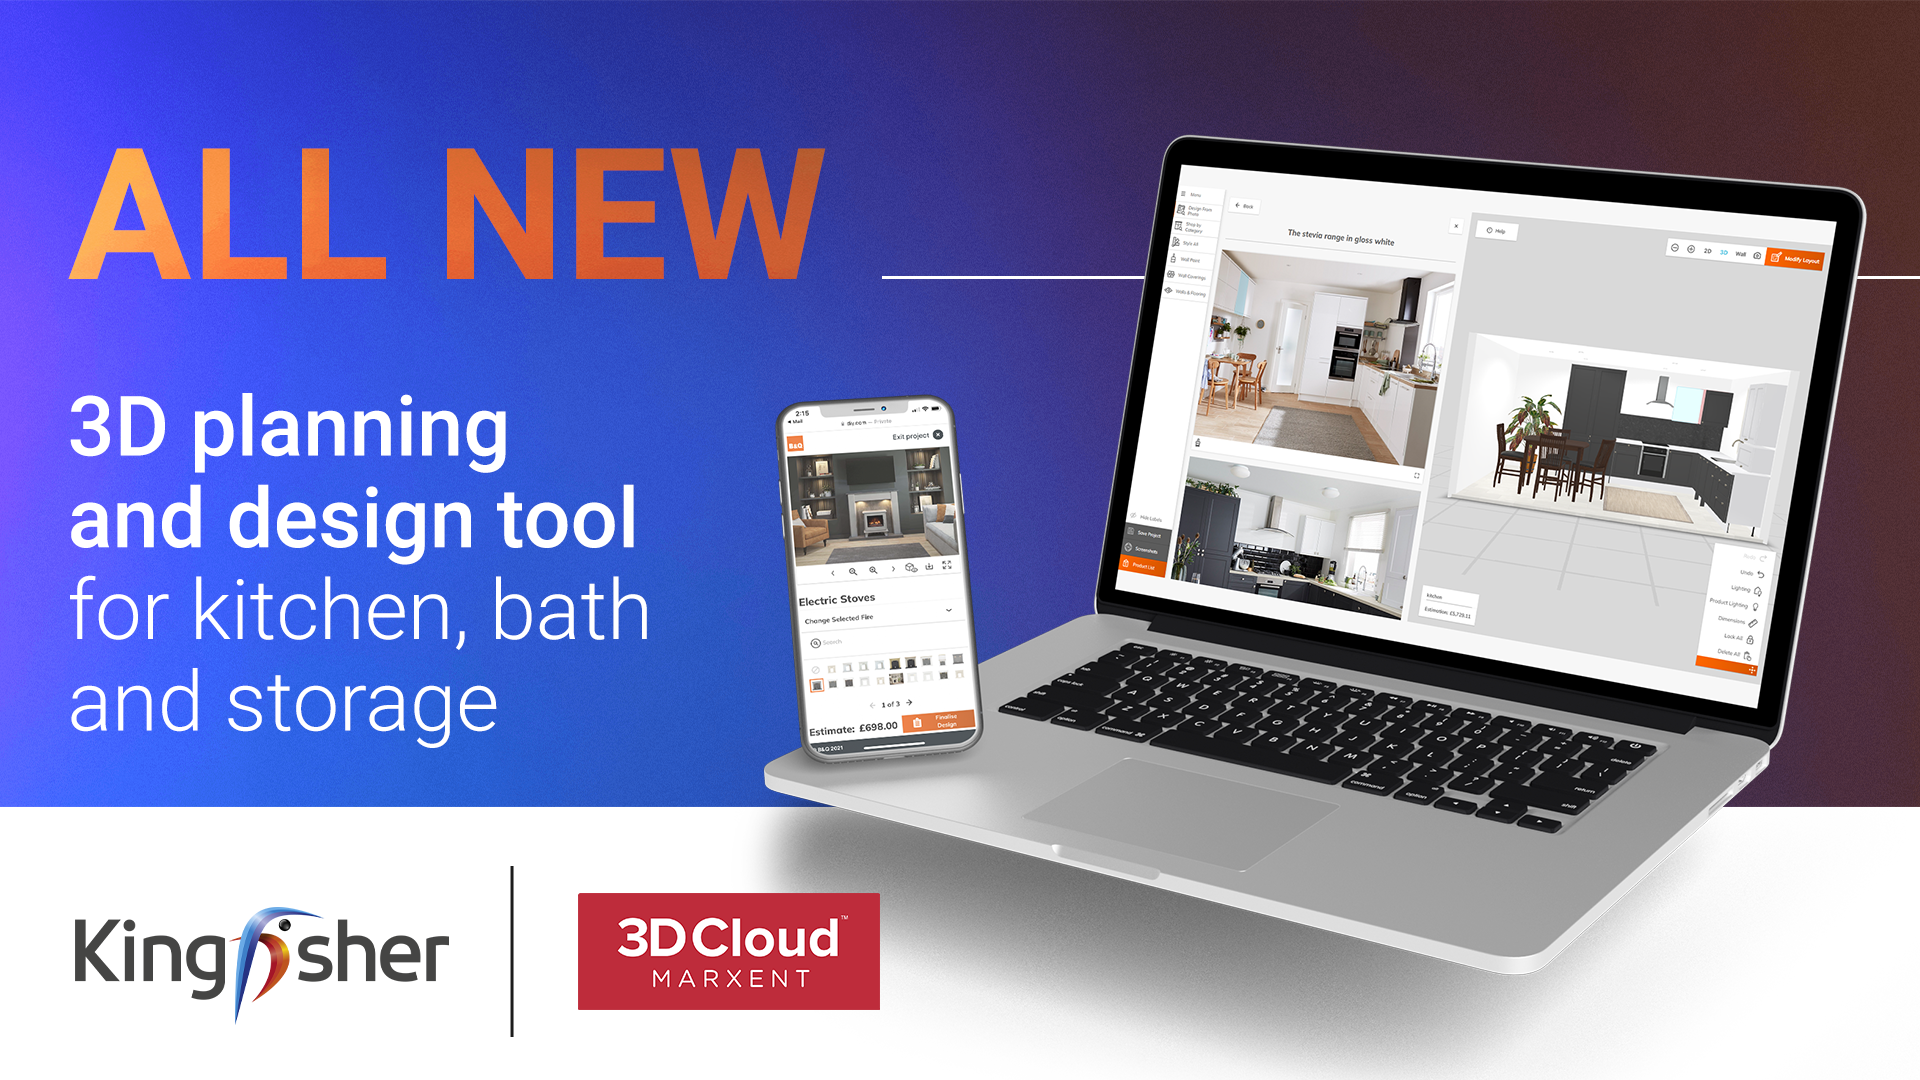 3D Cloud New Product Announcement - 3D visualisation, configuration, and room planning technology